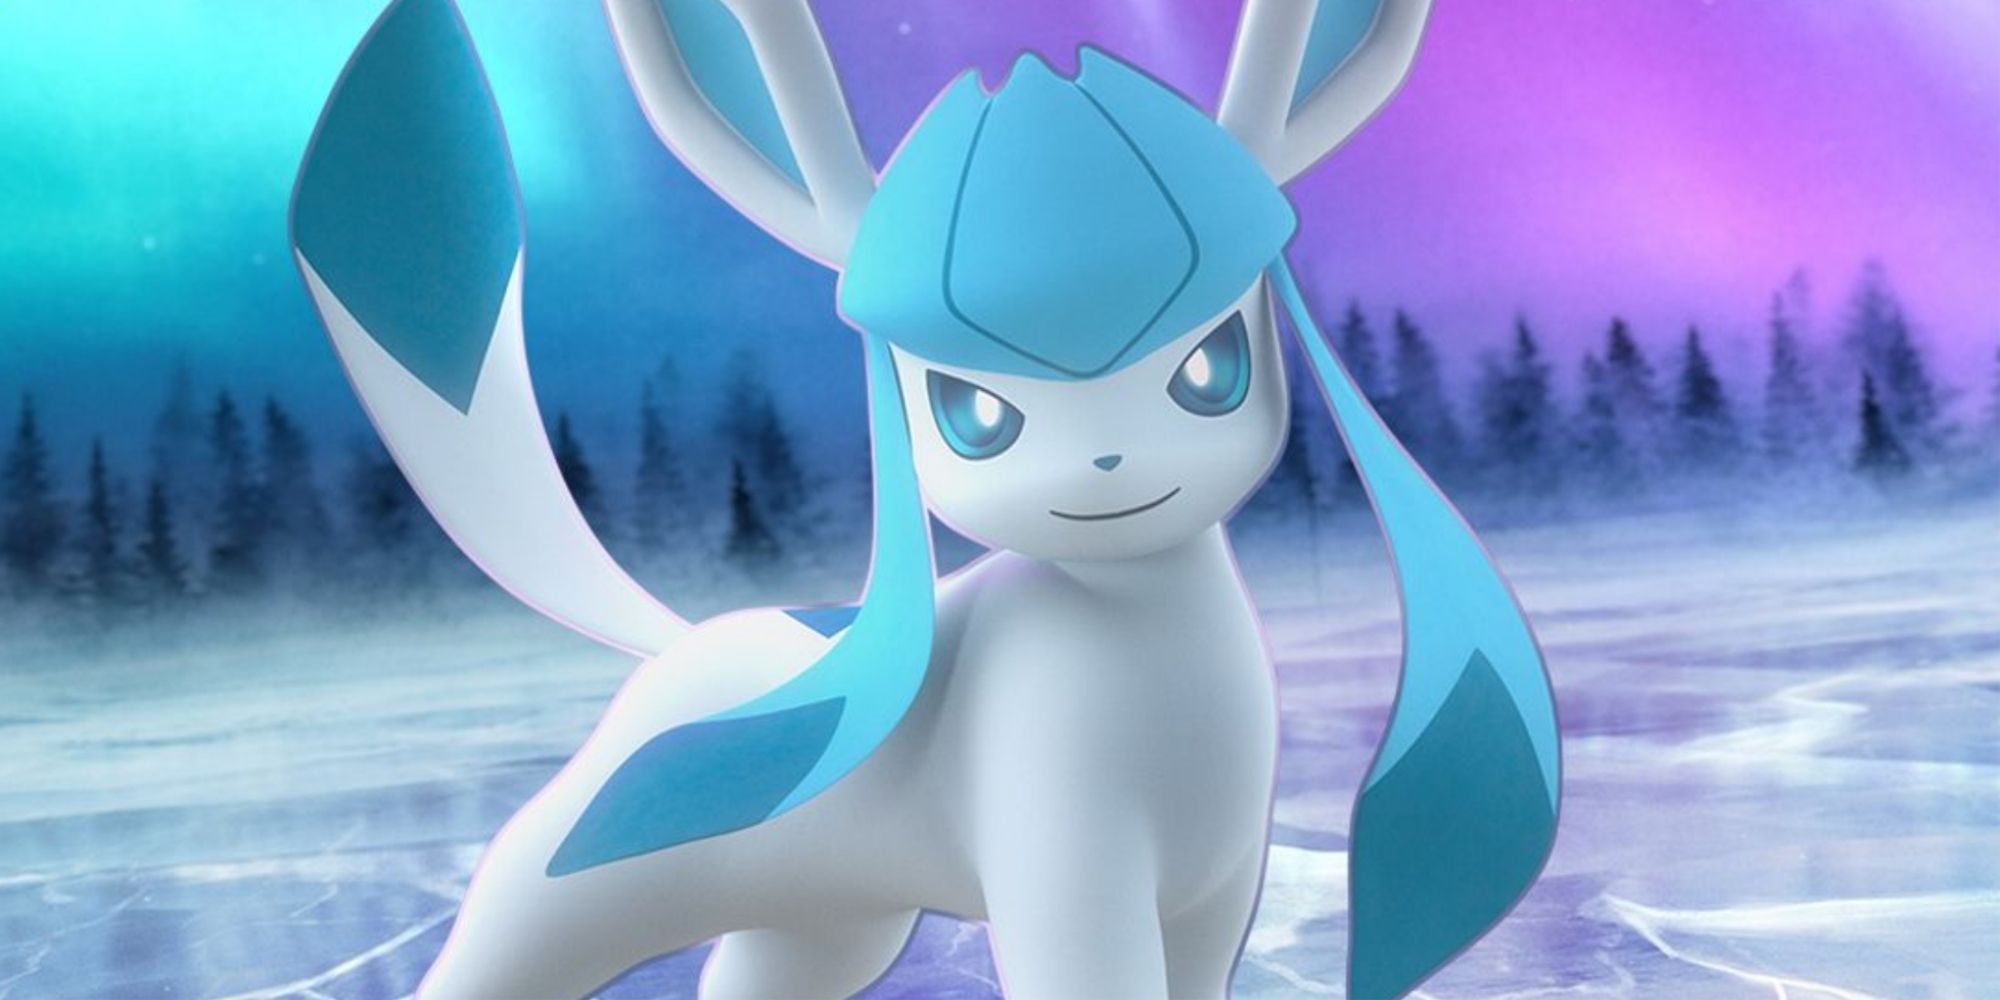 Glaceon smiling while standing on cracked ice with trees behind it.